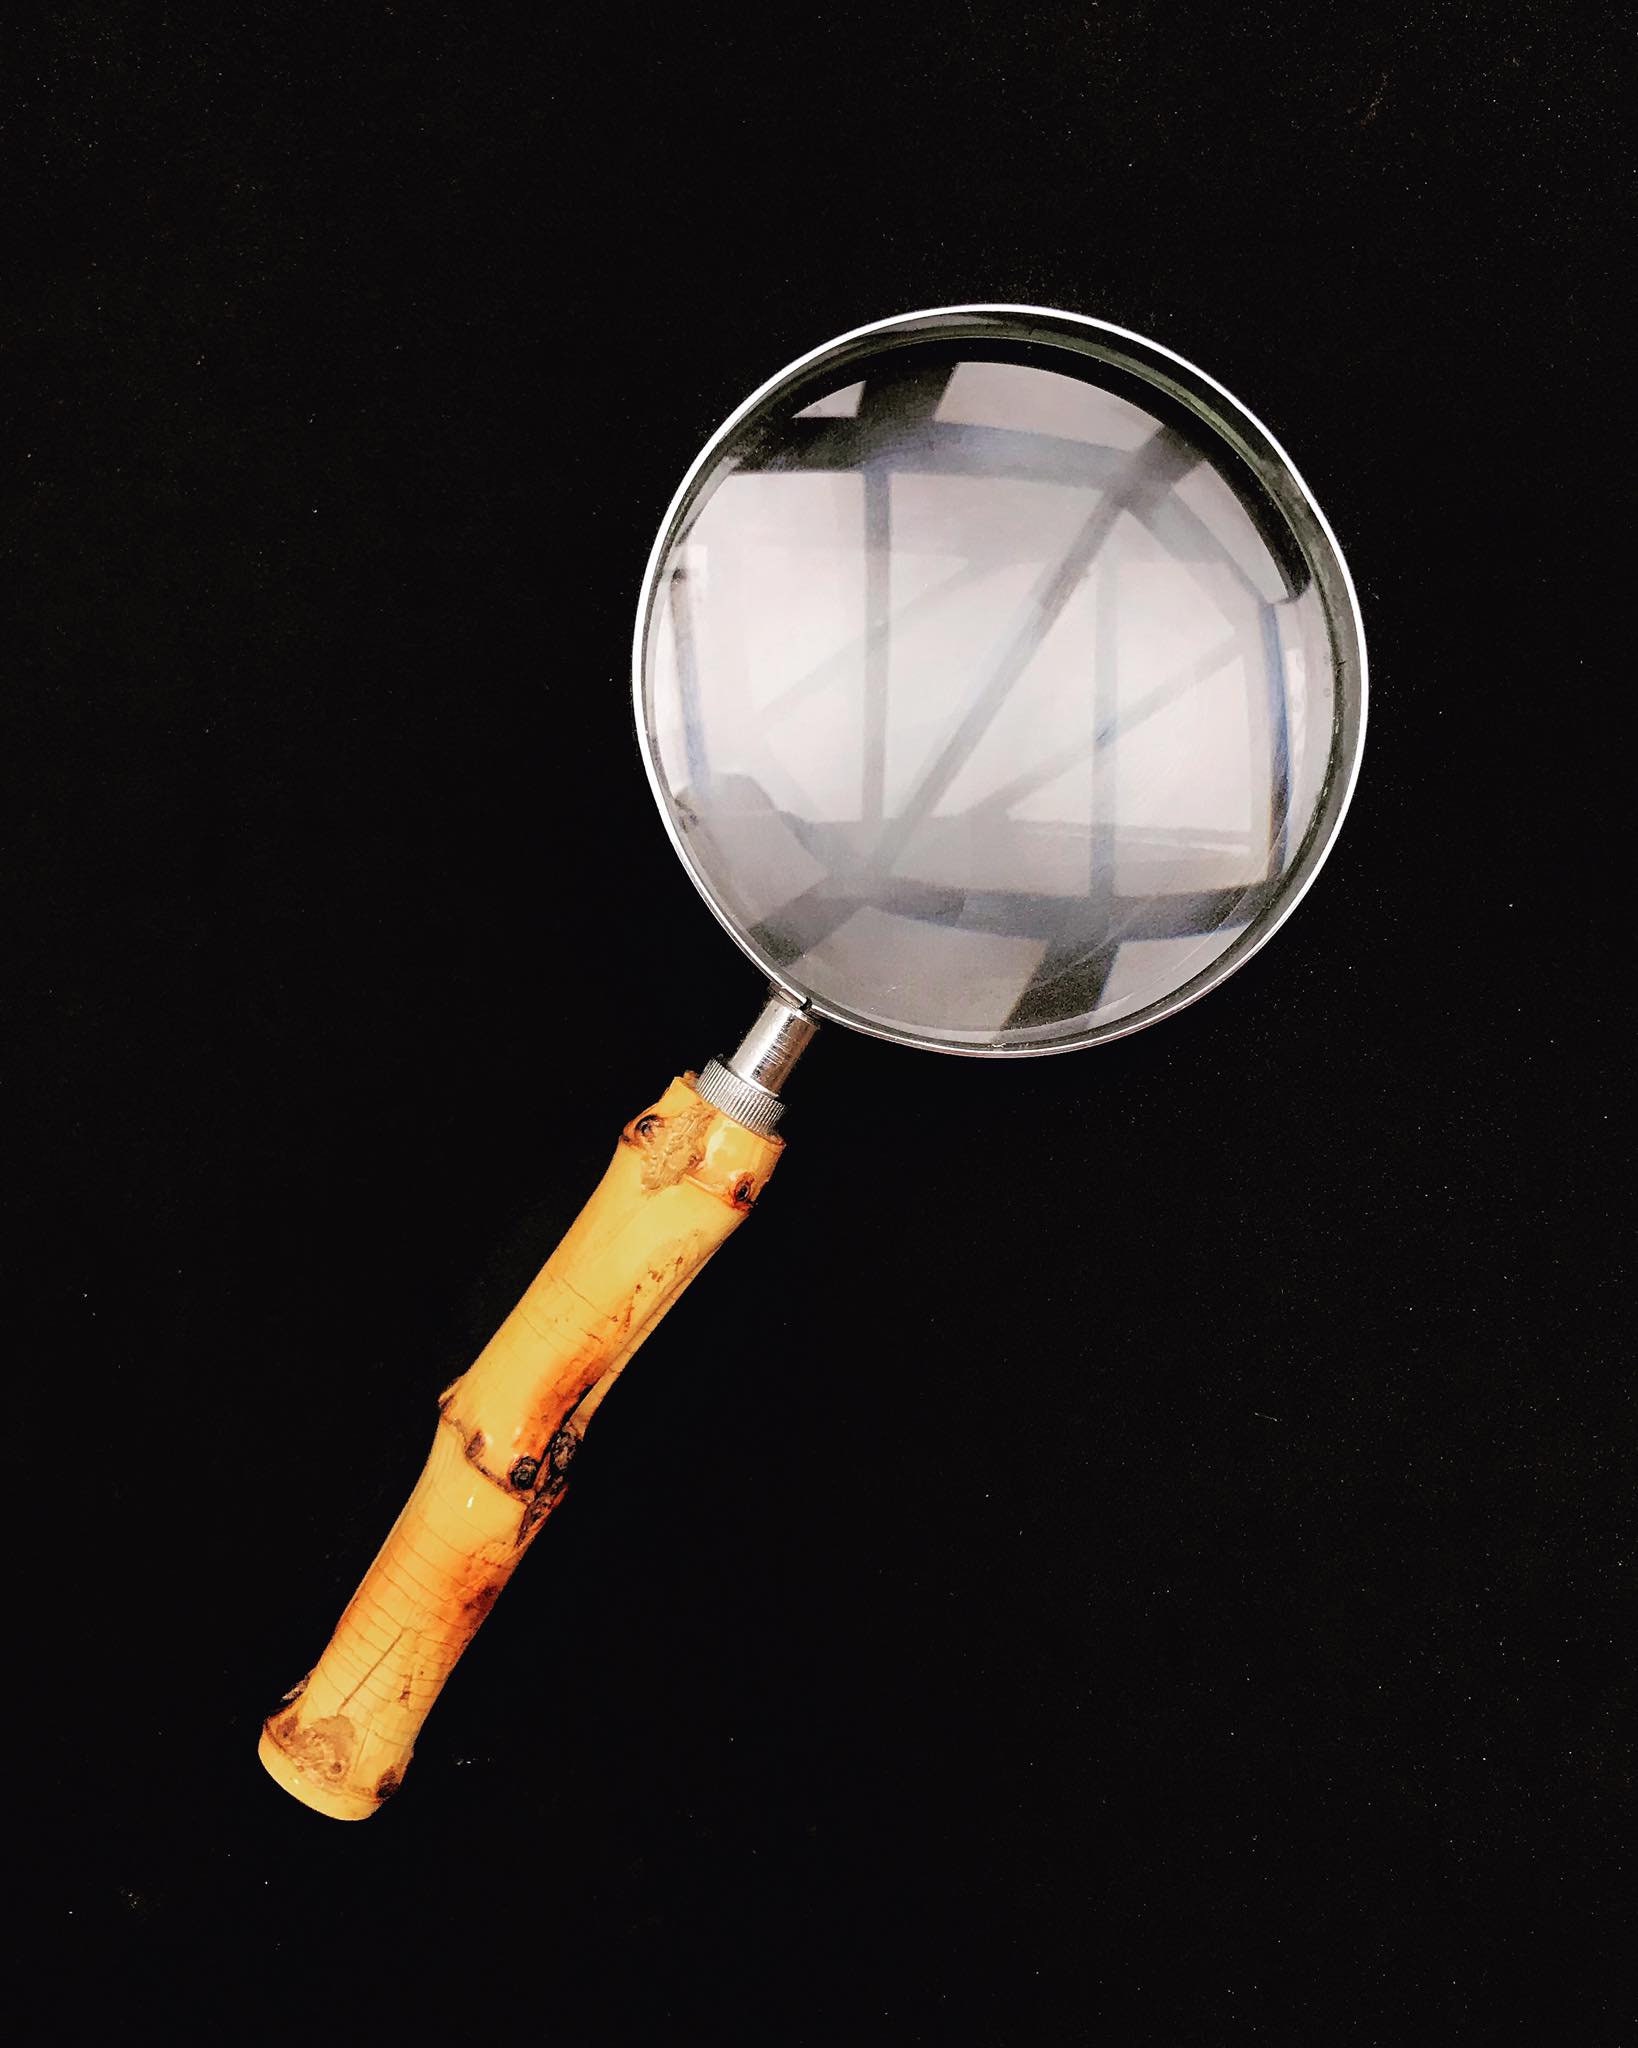 Adjustable Magnifying Glass for Coins Collections Editorial Image